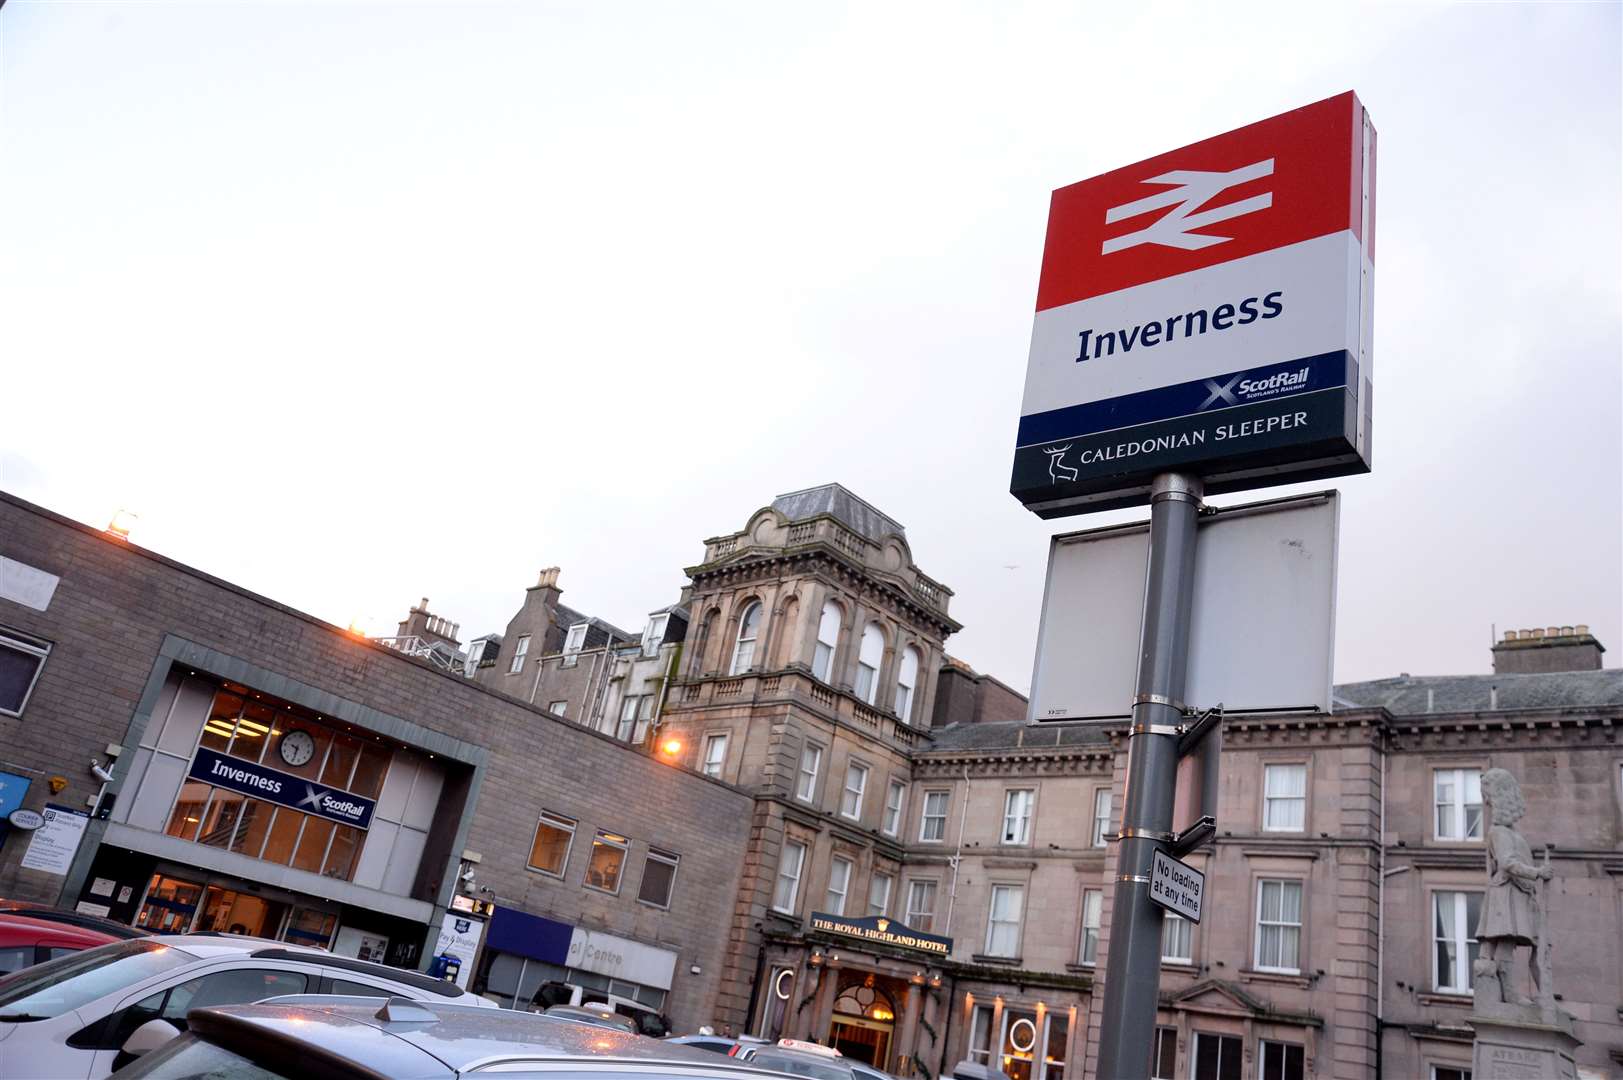 A minor disruption may cause train delays between Aberdeen and Inverness.